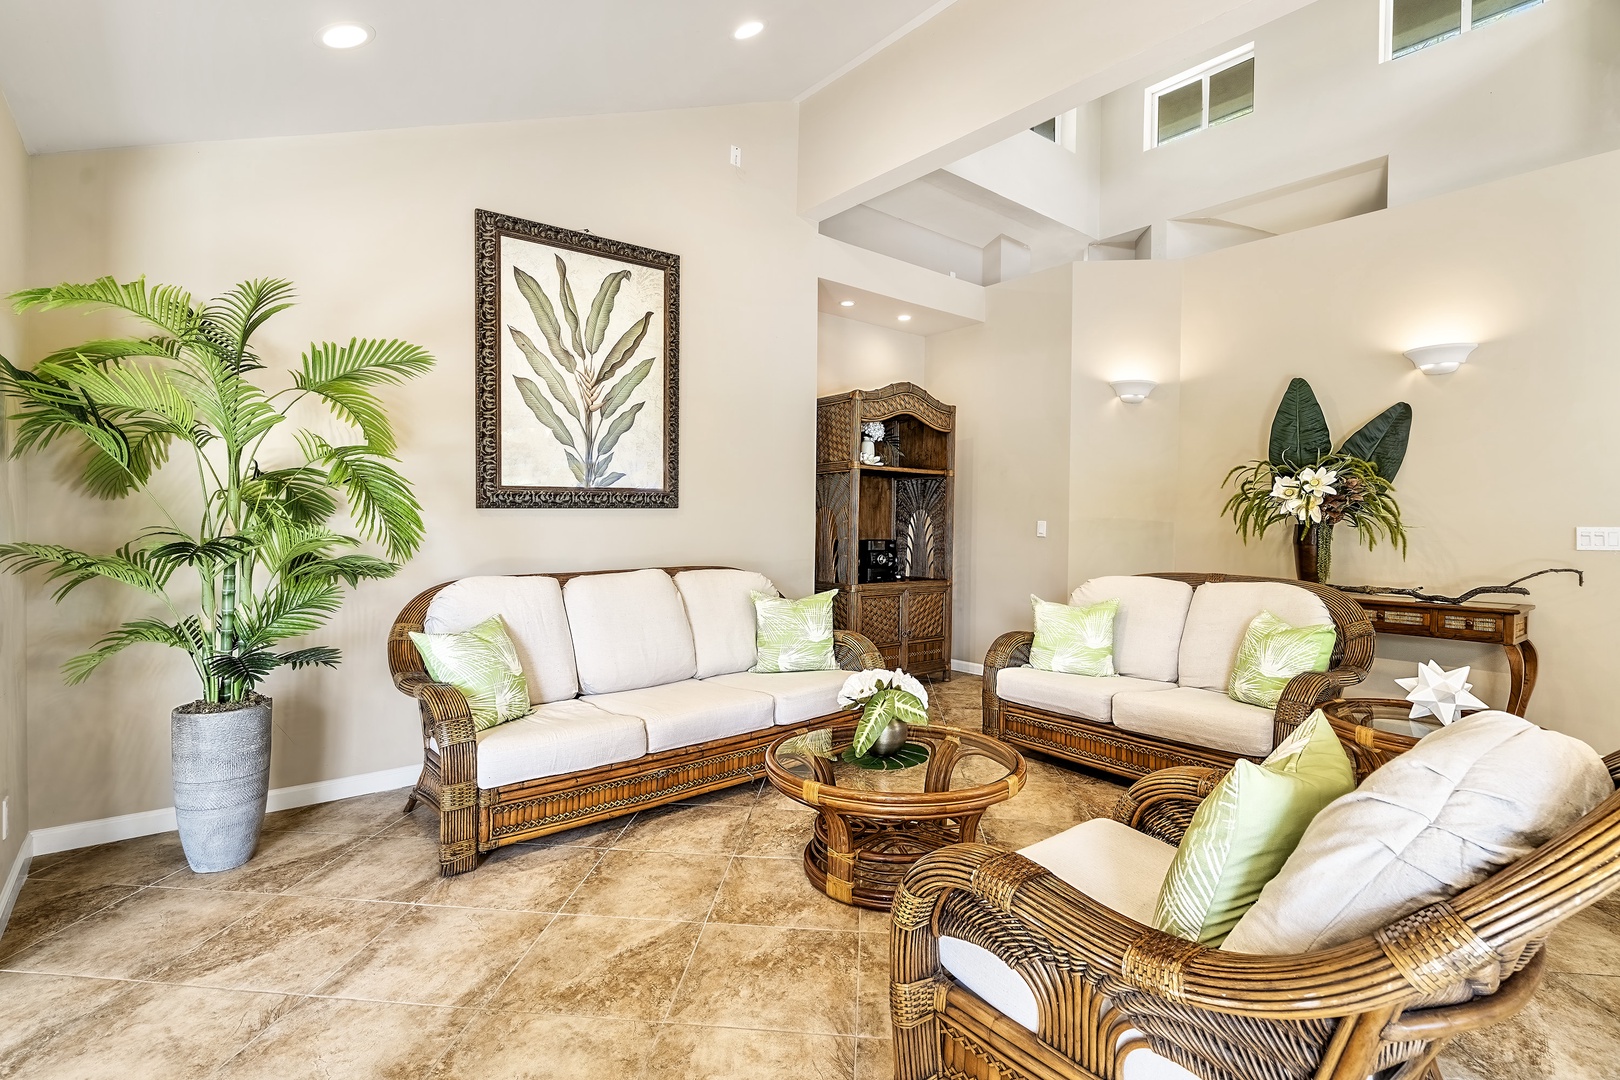 Kailua Kona Vacation Rentals, Lymans Bay Hale - Comfortable seating in the great room